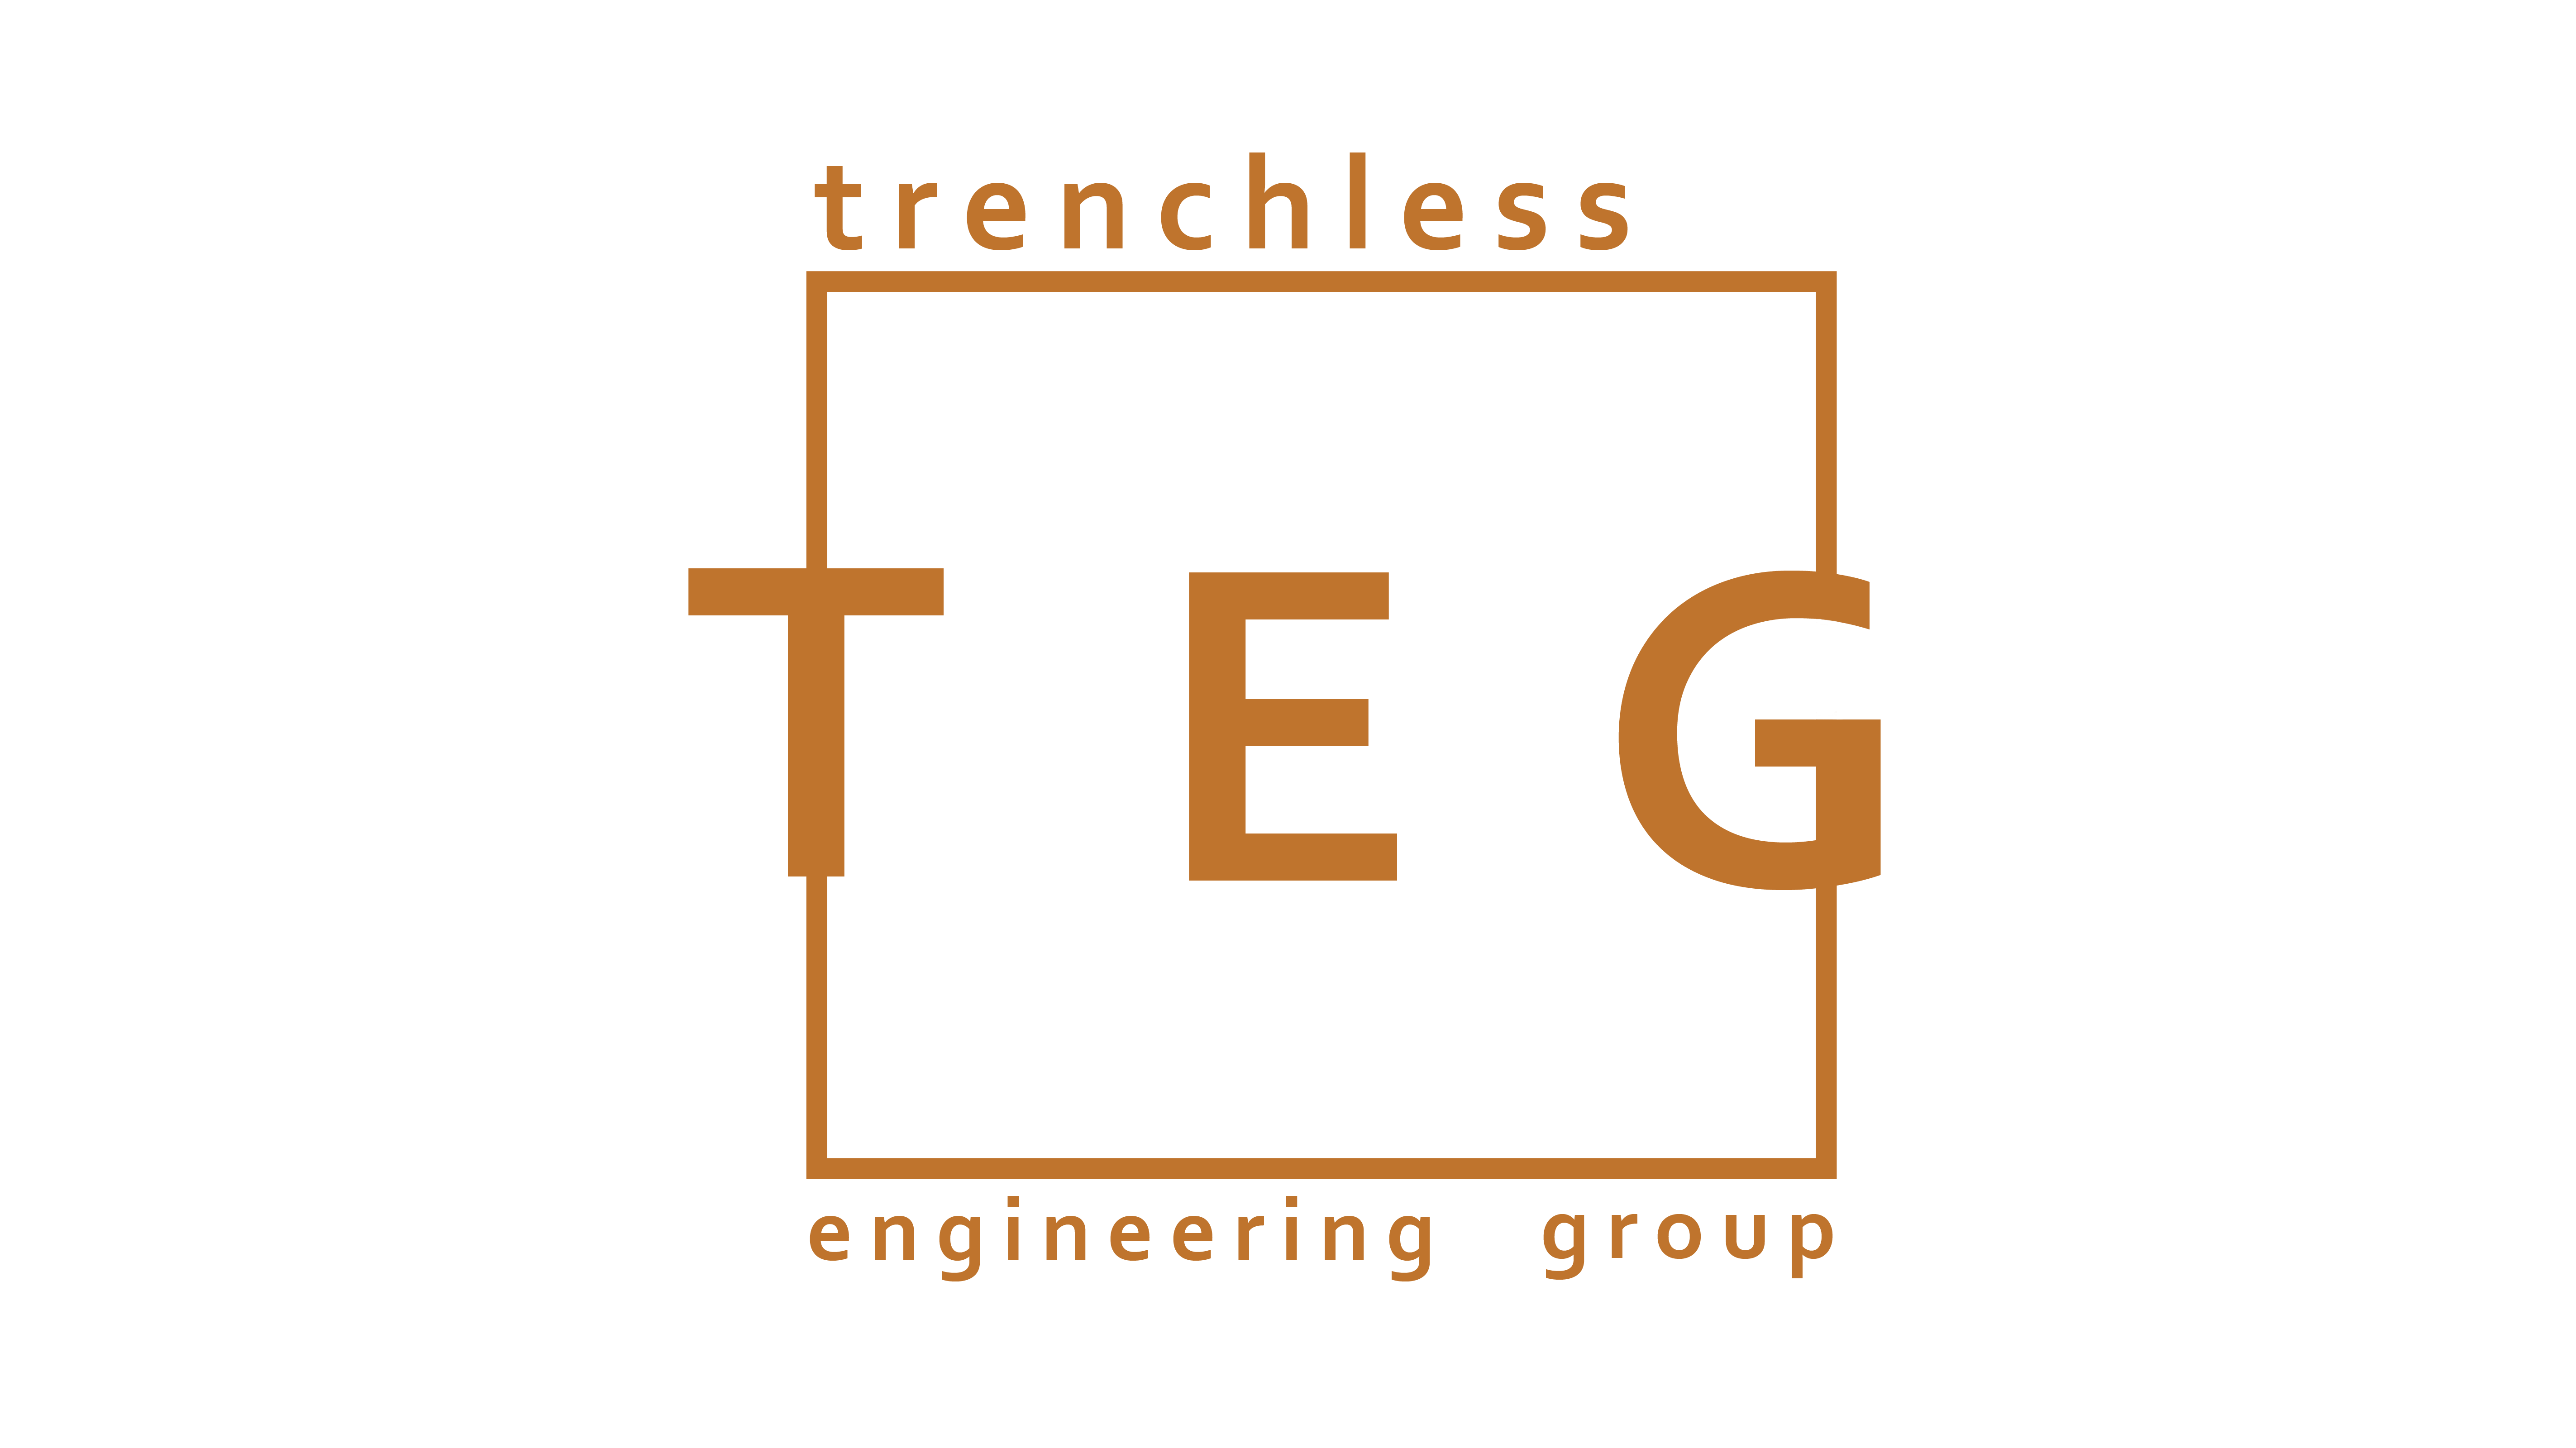 Trenchless Engineering Group